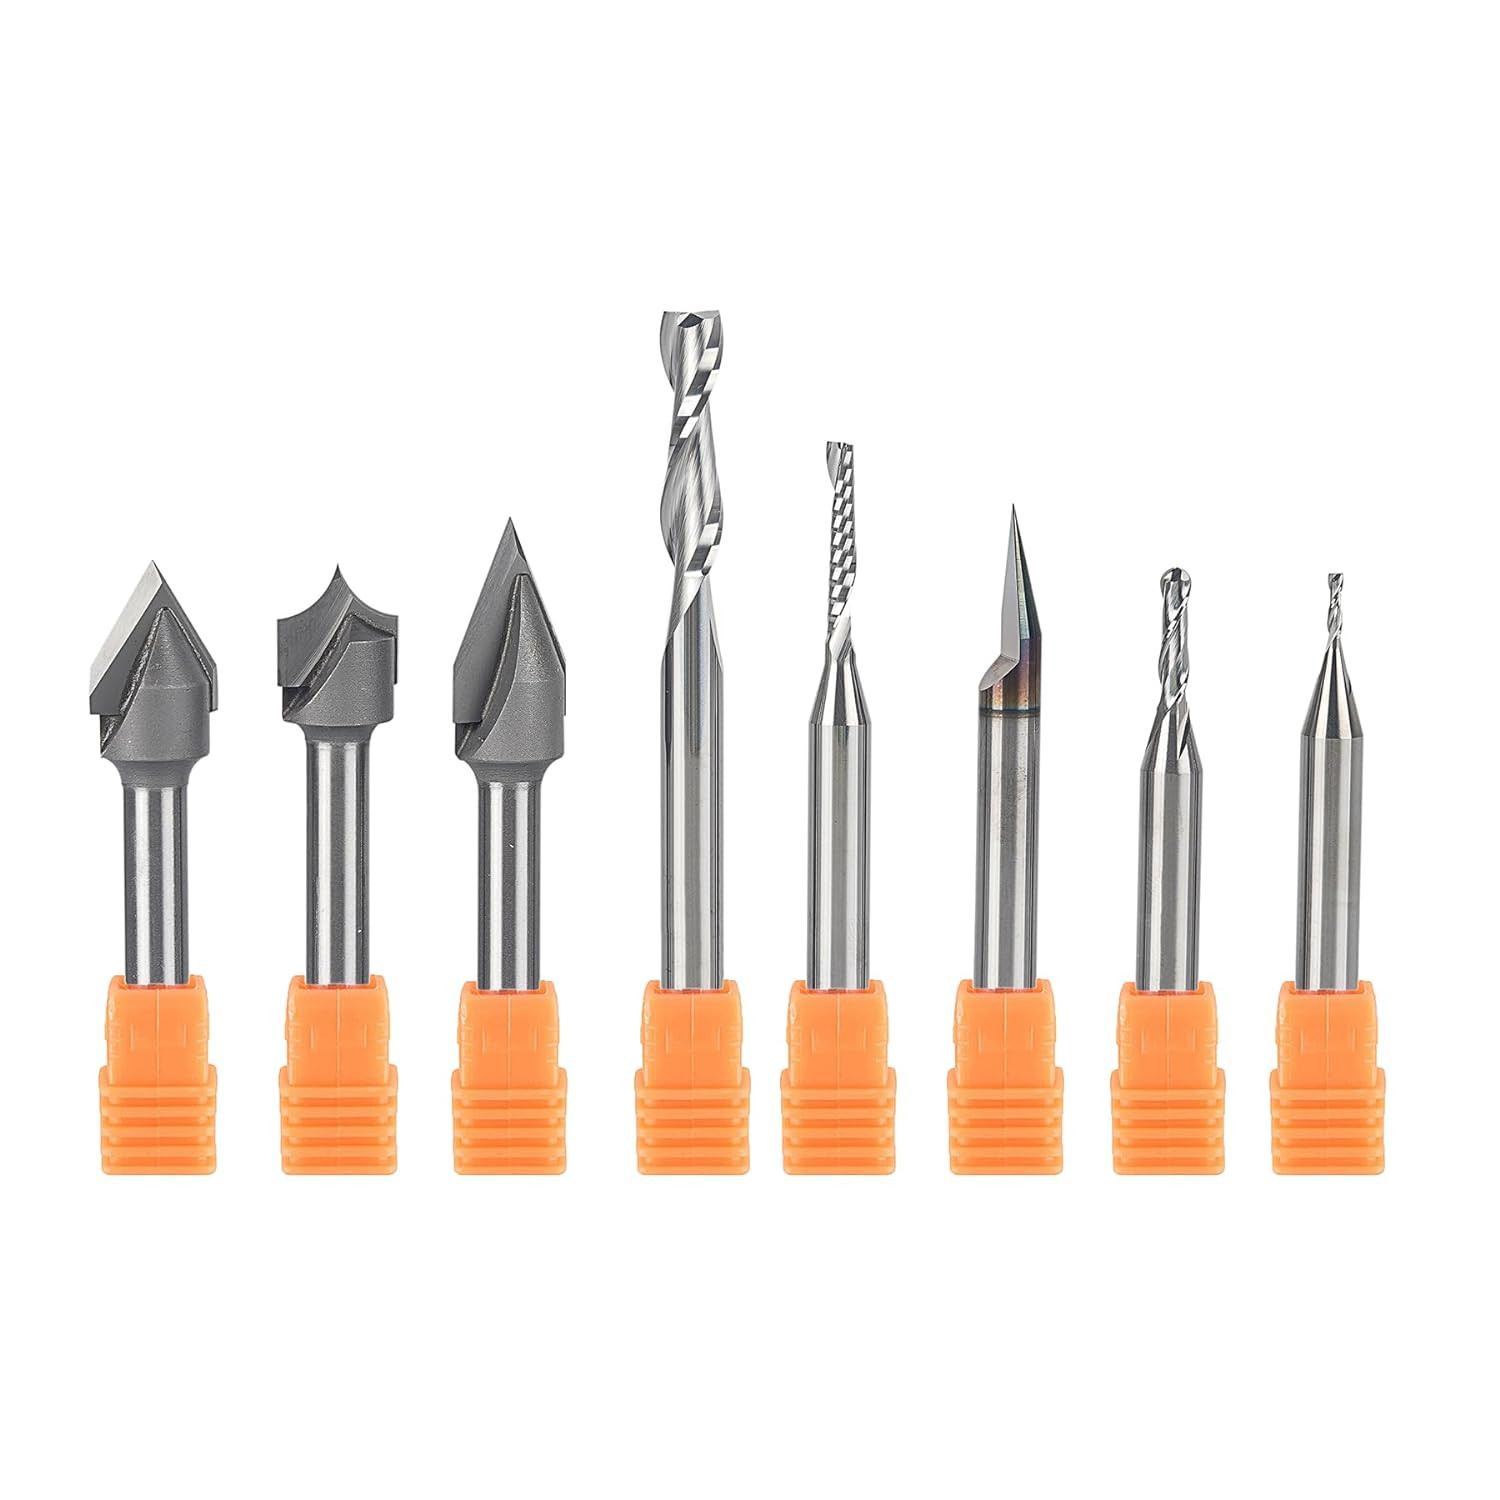 See more about Router bits